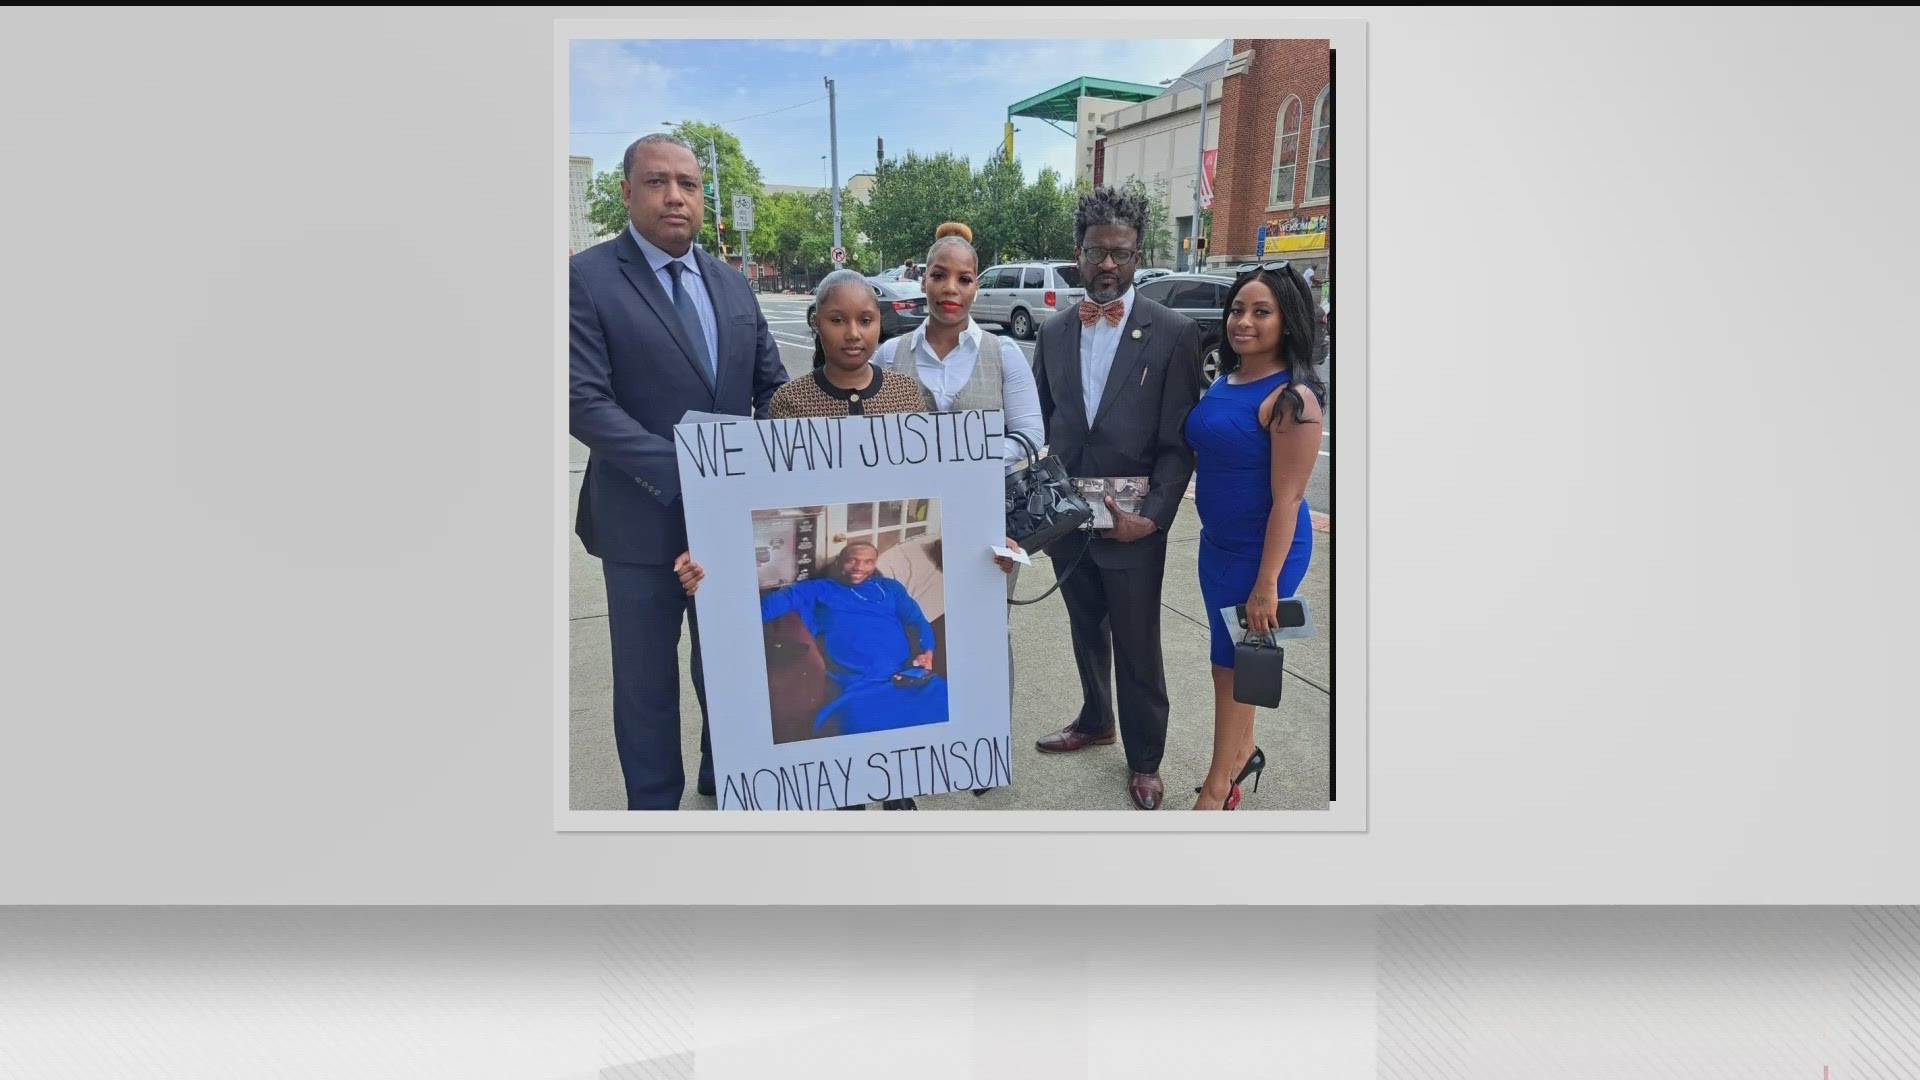 The Fulton County Medical Examiner's Office released a cause of death in its autopsy report. The attorney representing Stinson's family says something doesn't add up